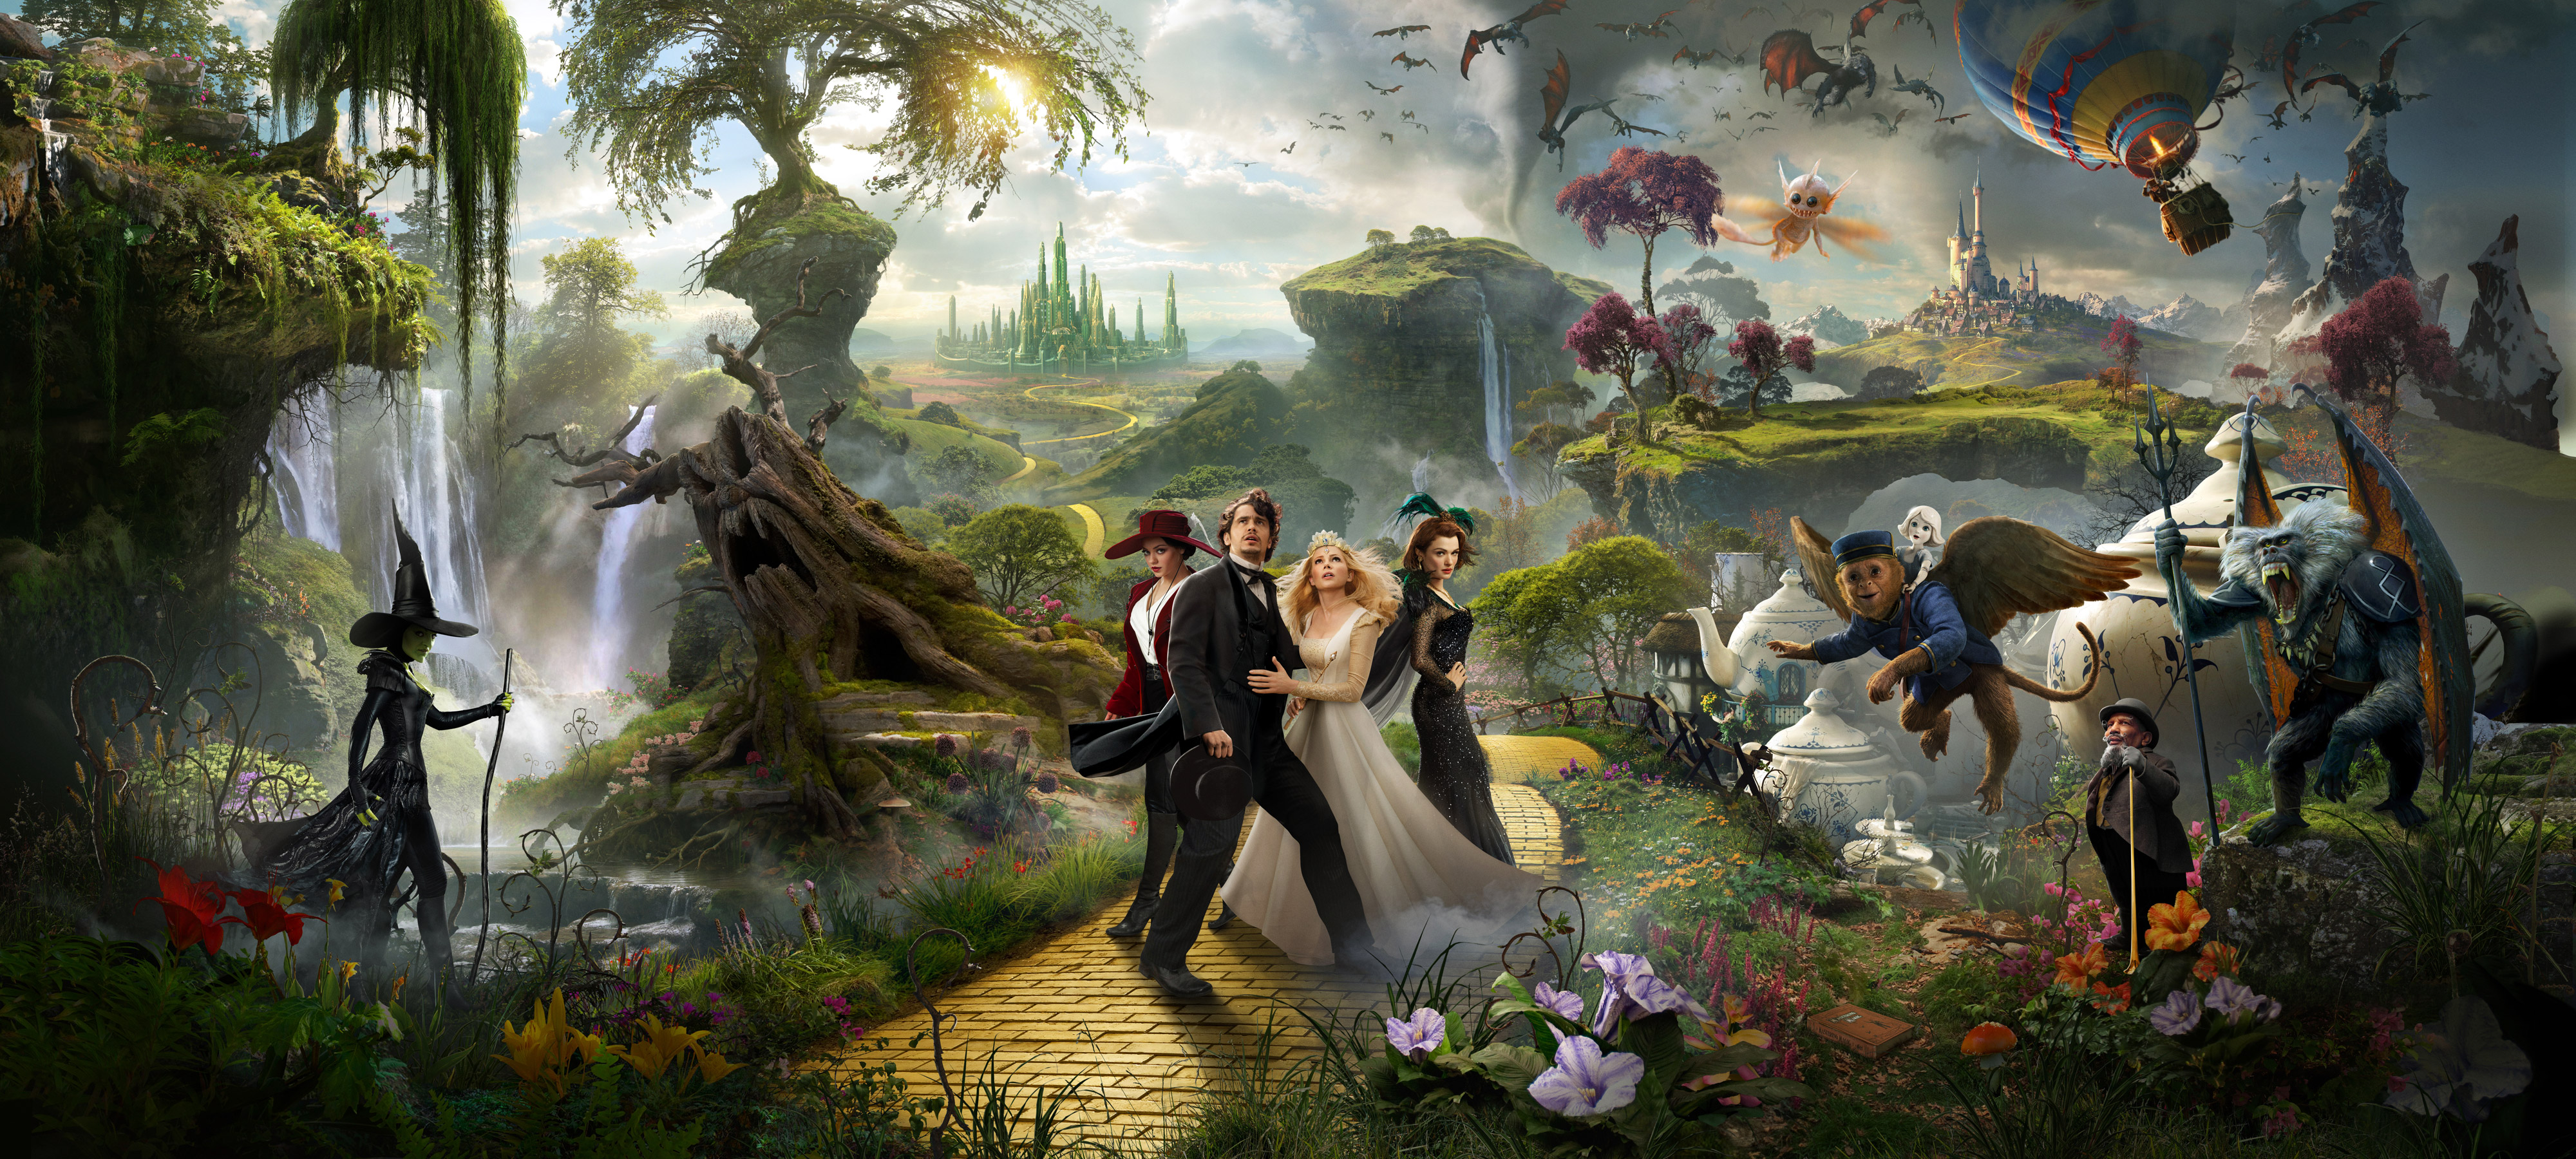 movie, oz the great and powerful